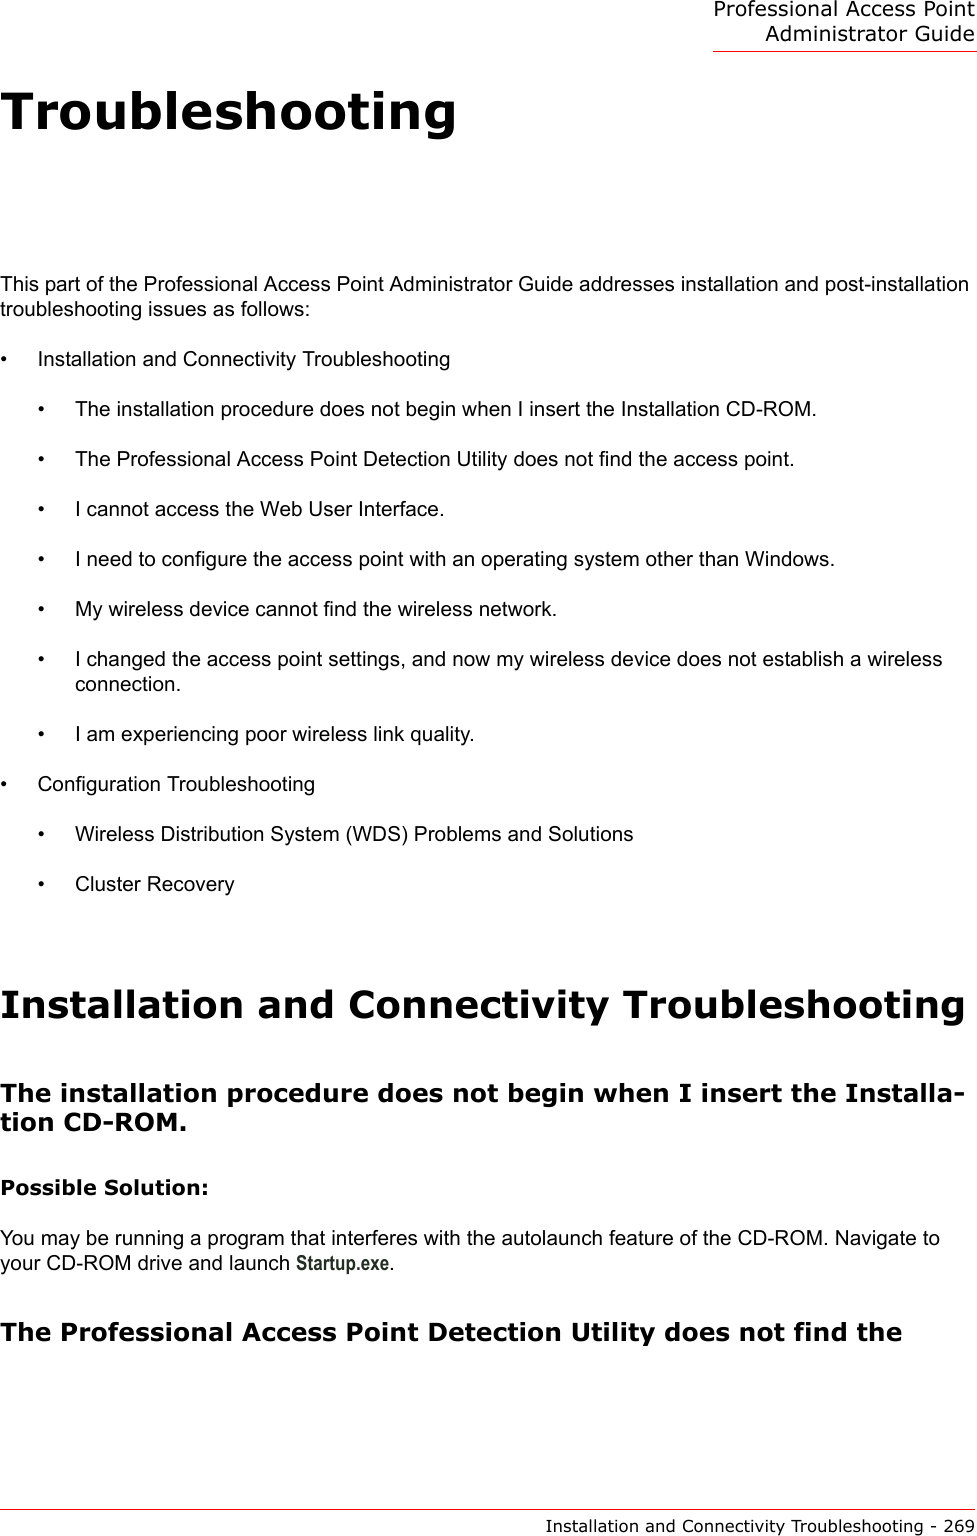 Professional Access Point Administrator GuideInstallation and Connectivity Troubleshooting - 269TroubleshootingThis part of the Professional Access Point Administrator Guide addresses installation and post-installation troubleshooting issues as follows:•Installation and Connectivity Troubleshooting•The installation procedure does not begin when I insert the Installation CD-ROM.•The Professional Access Point Detection Utility does not find the access point.•I cannot access the Web User Interface.•I need to configure the access point with an operating system other than Windows.•My wireless device cannot find the wireless network.•I changed the access point settings, and now my wireless device does not establish a wireless connection.•I am experiencing poor wireless link quality.•Configuration Troubleshooting•Wireless Distribution System (WDS) Problems and Solutions•Cluster RecoveryInstallation and Connectivity TroubleshootingThe installation procedure does not begin when I insert the Installa-tion CD-ROM.Possible Solution:You may be running a program that interferes with the autolaunch feature of the CD-ROM. Navigate to your CD-ROM drive and launch Startup.exe.The Professional Access Point Detection Utility does not find the 